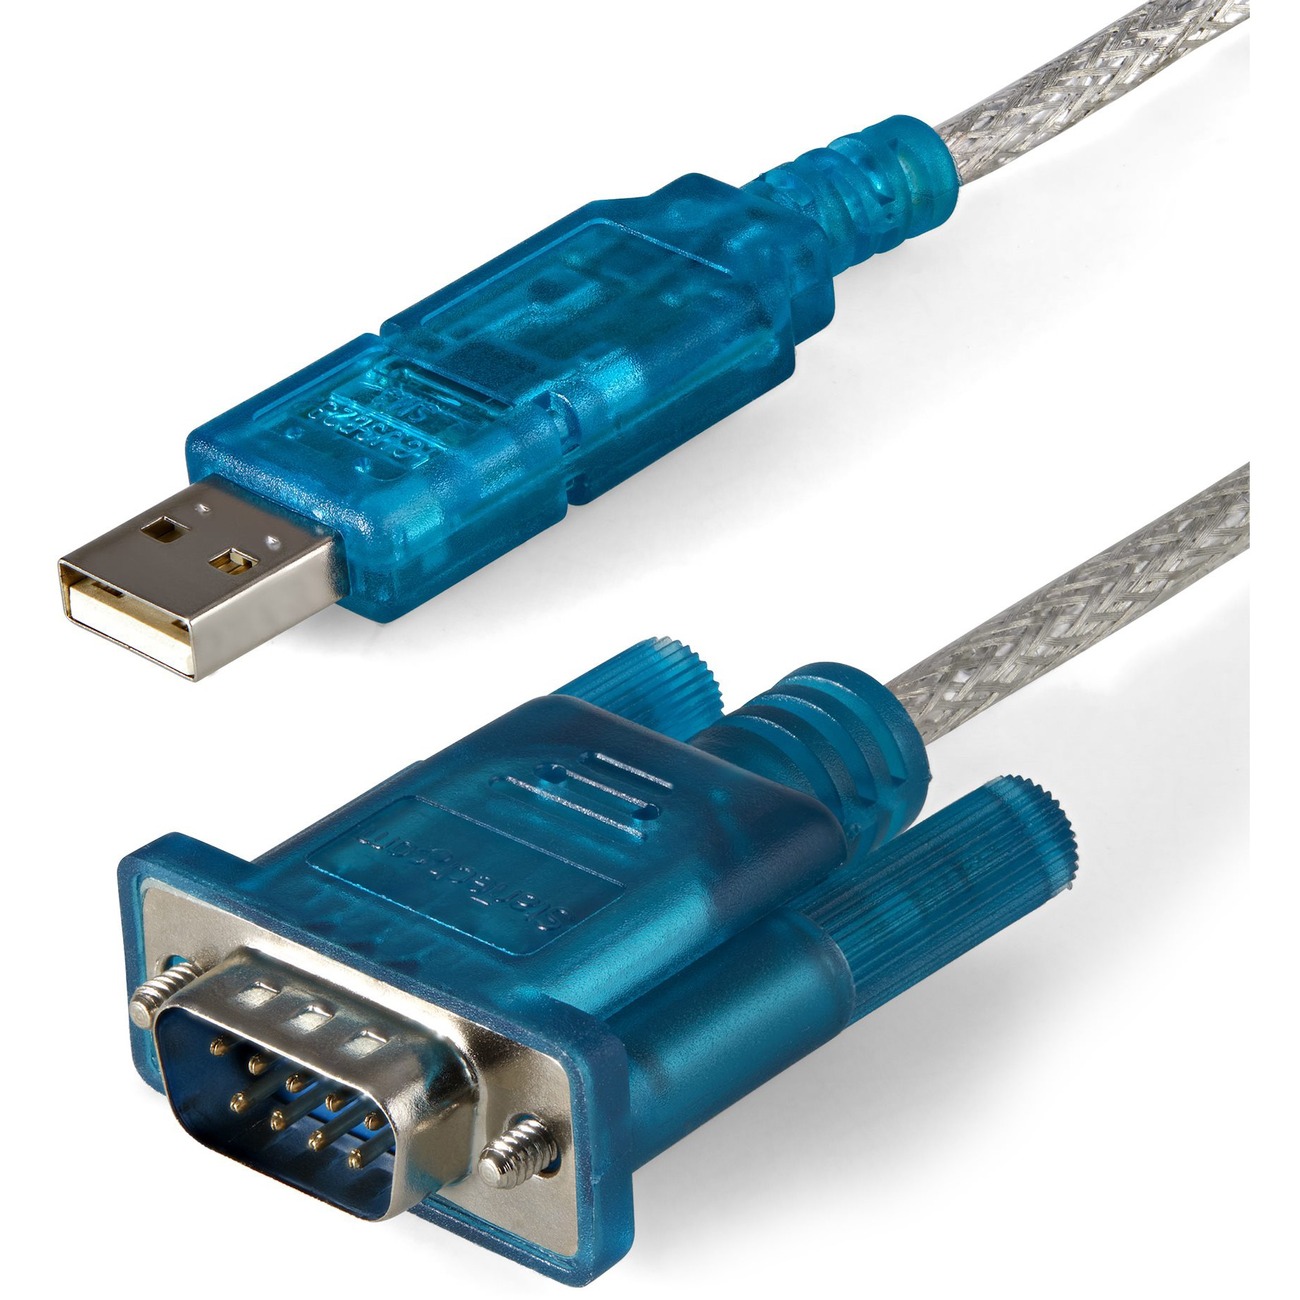 StarTech.com ICUSB232SM3 USB to Adapter - Prolific PL-2303 - 3 ft / 1m - DB9 (9-pin) - USB to RS232 Adapter Cable - USB Serial Serial - Newegg.com